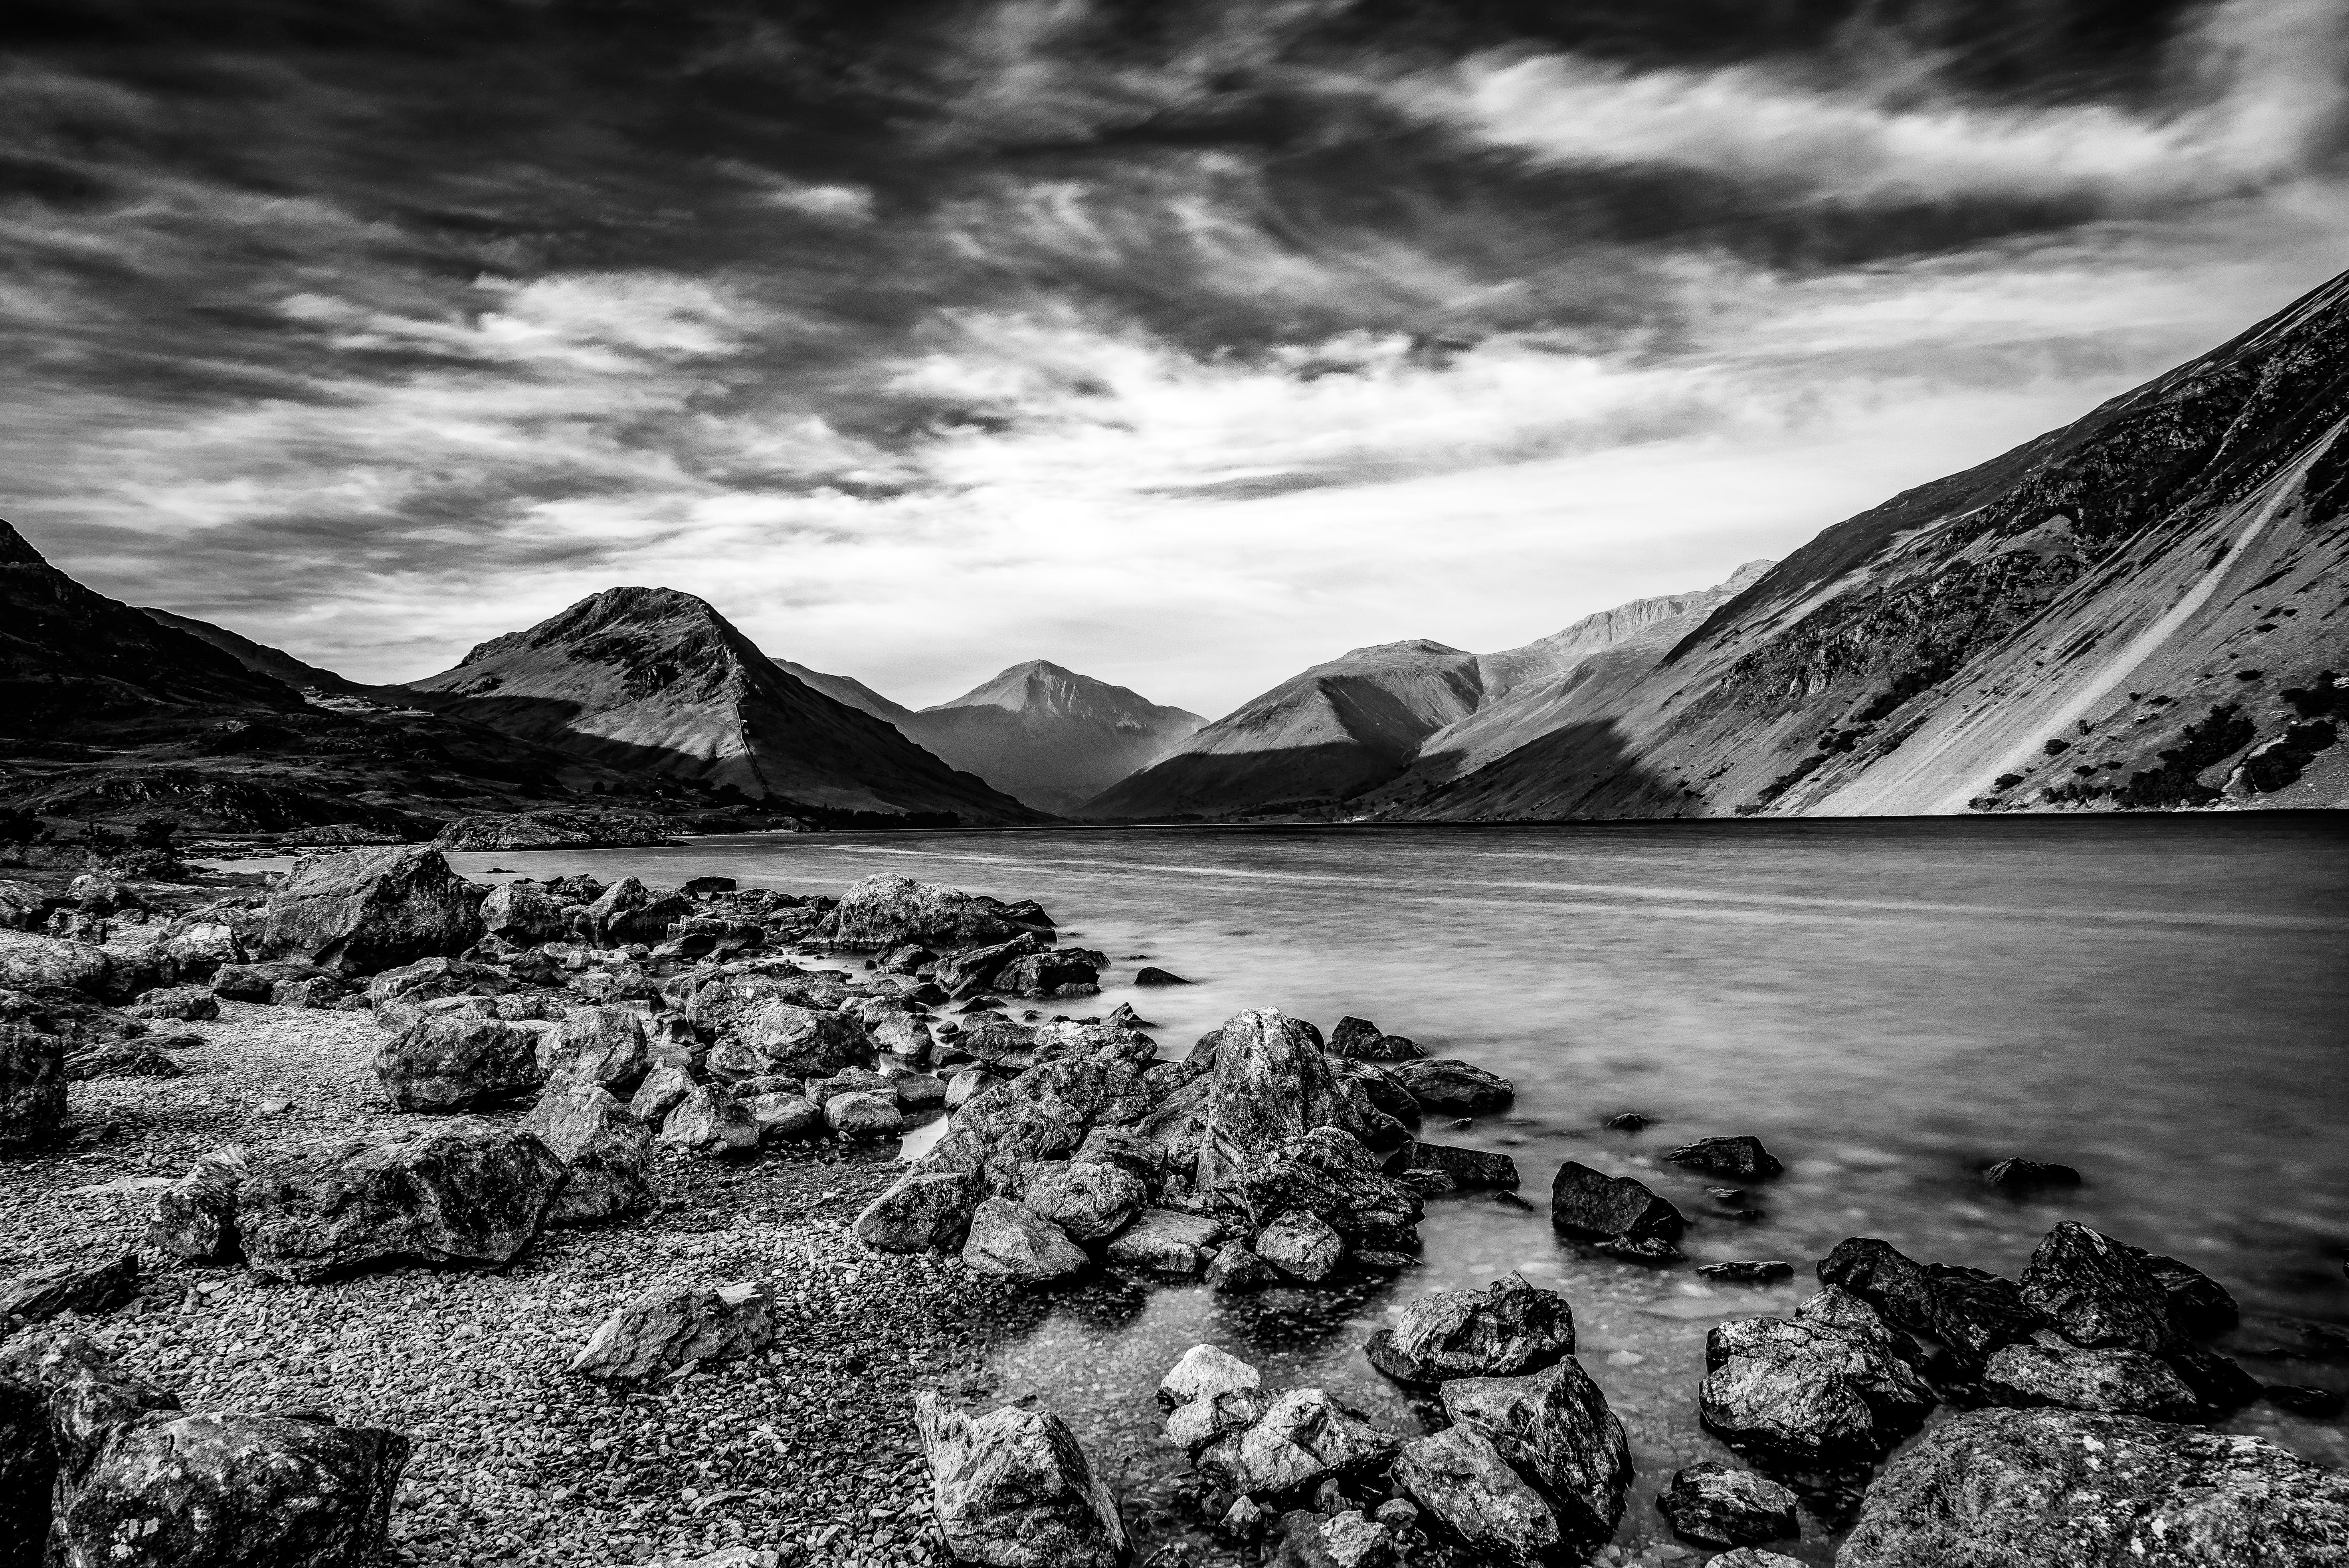 Grayscale photo of mountain beside body of water HD ...